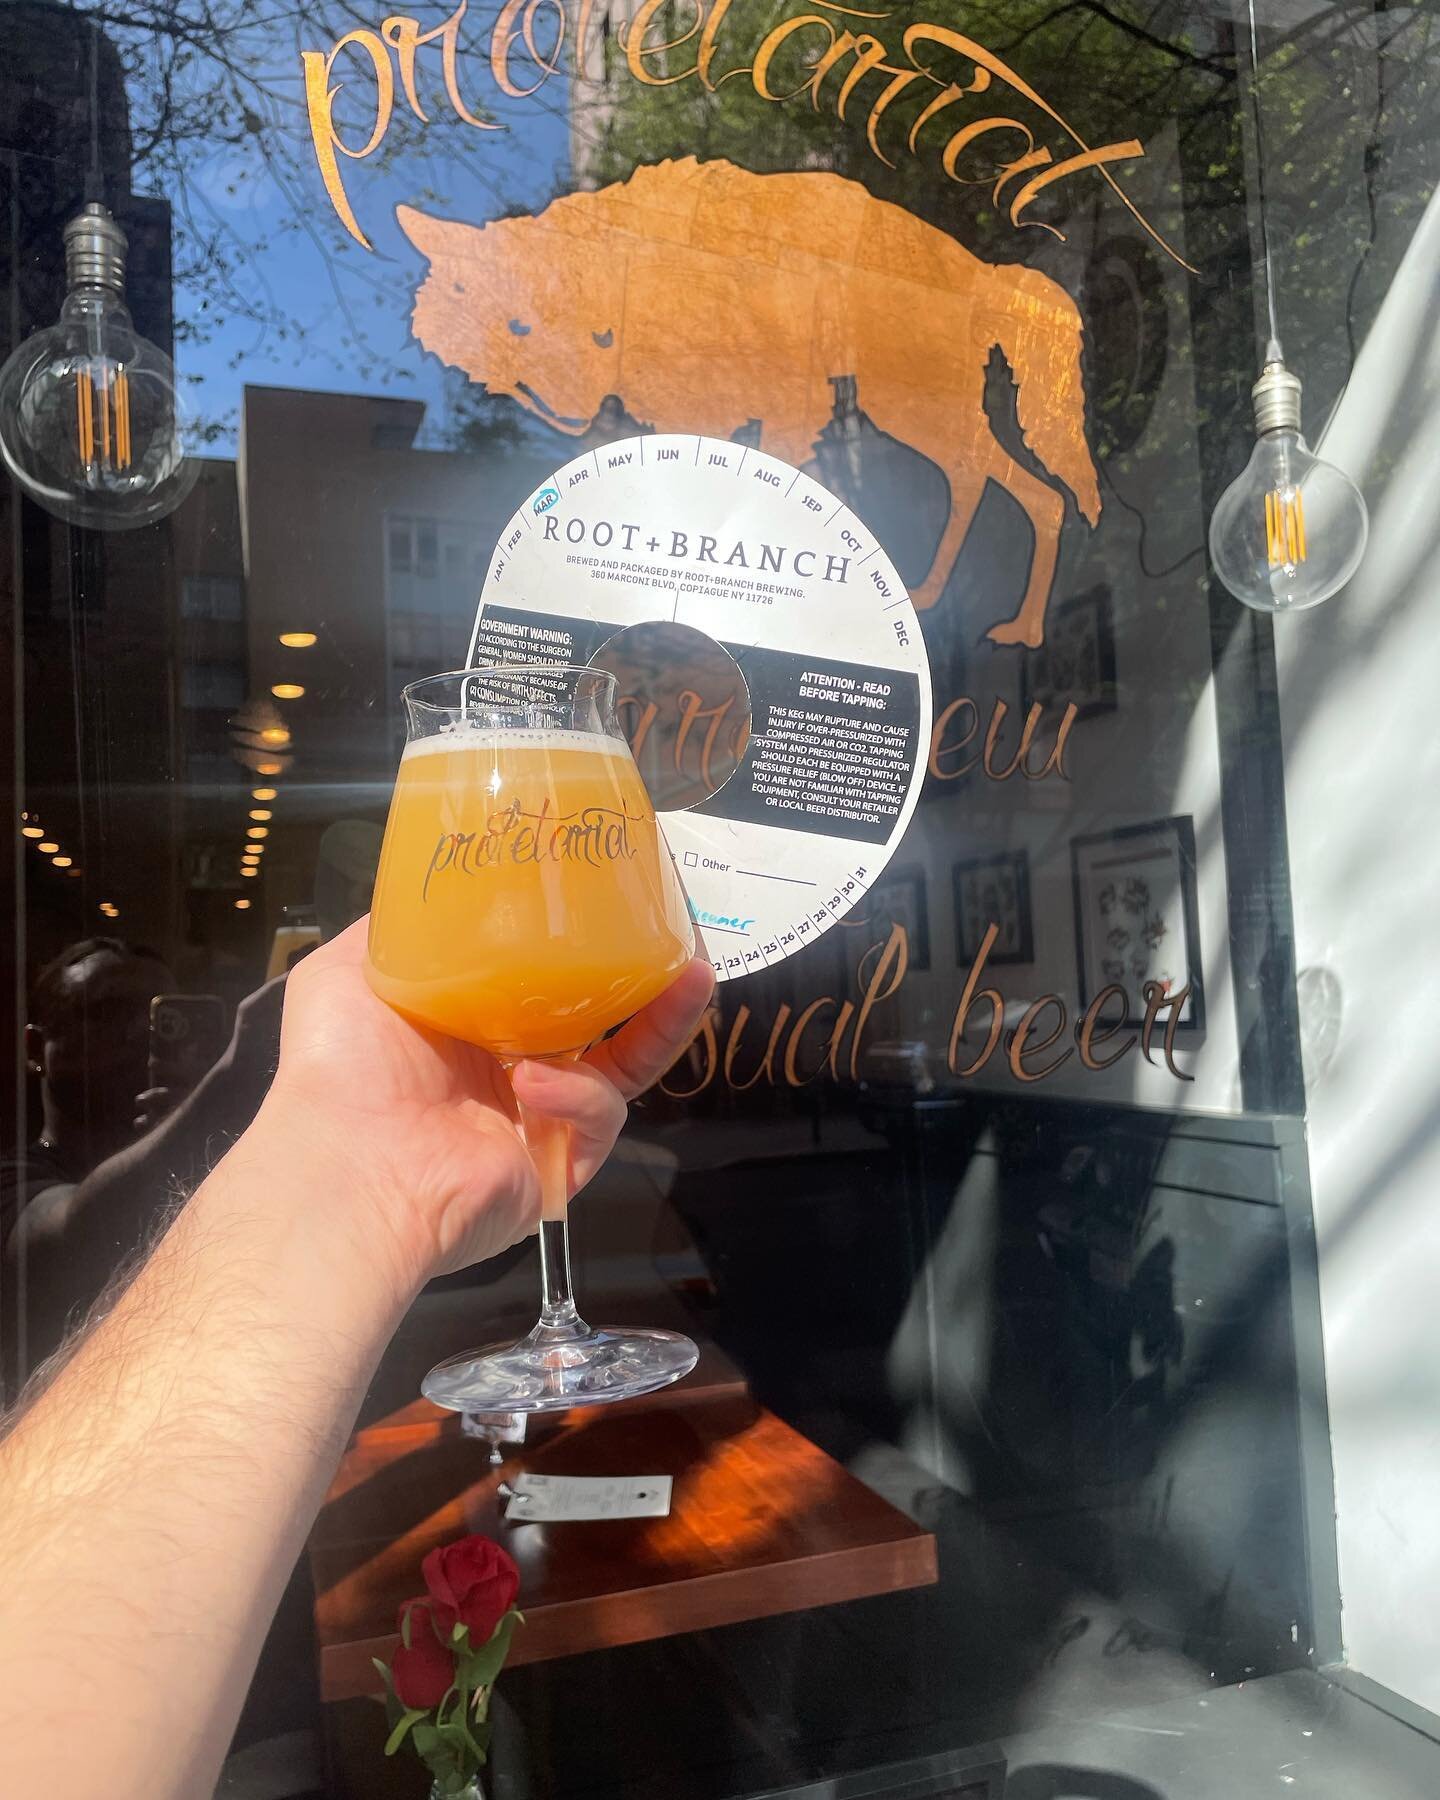 Hola!!

New on draft from our homies @rootandbranchbrewing / @thetestbrewery Dream Dreams The Dreamer - Overnight Multi Oat wheat IPA exclusively hopped w/ Simcoe 

See you at 5pm 👿⛓

#craftbeer